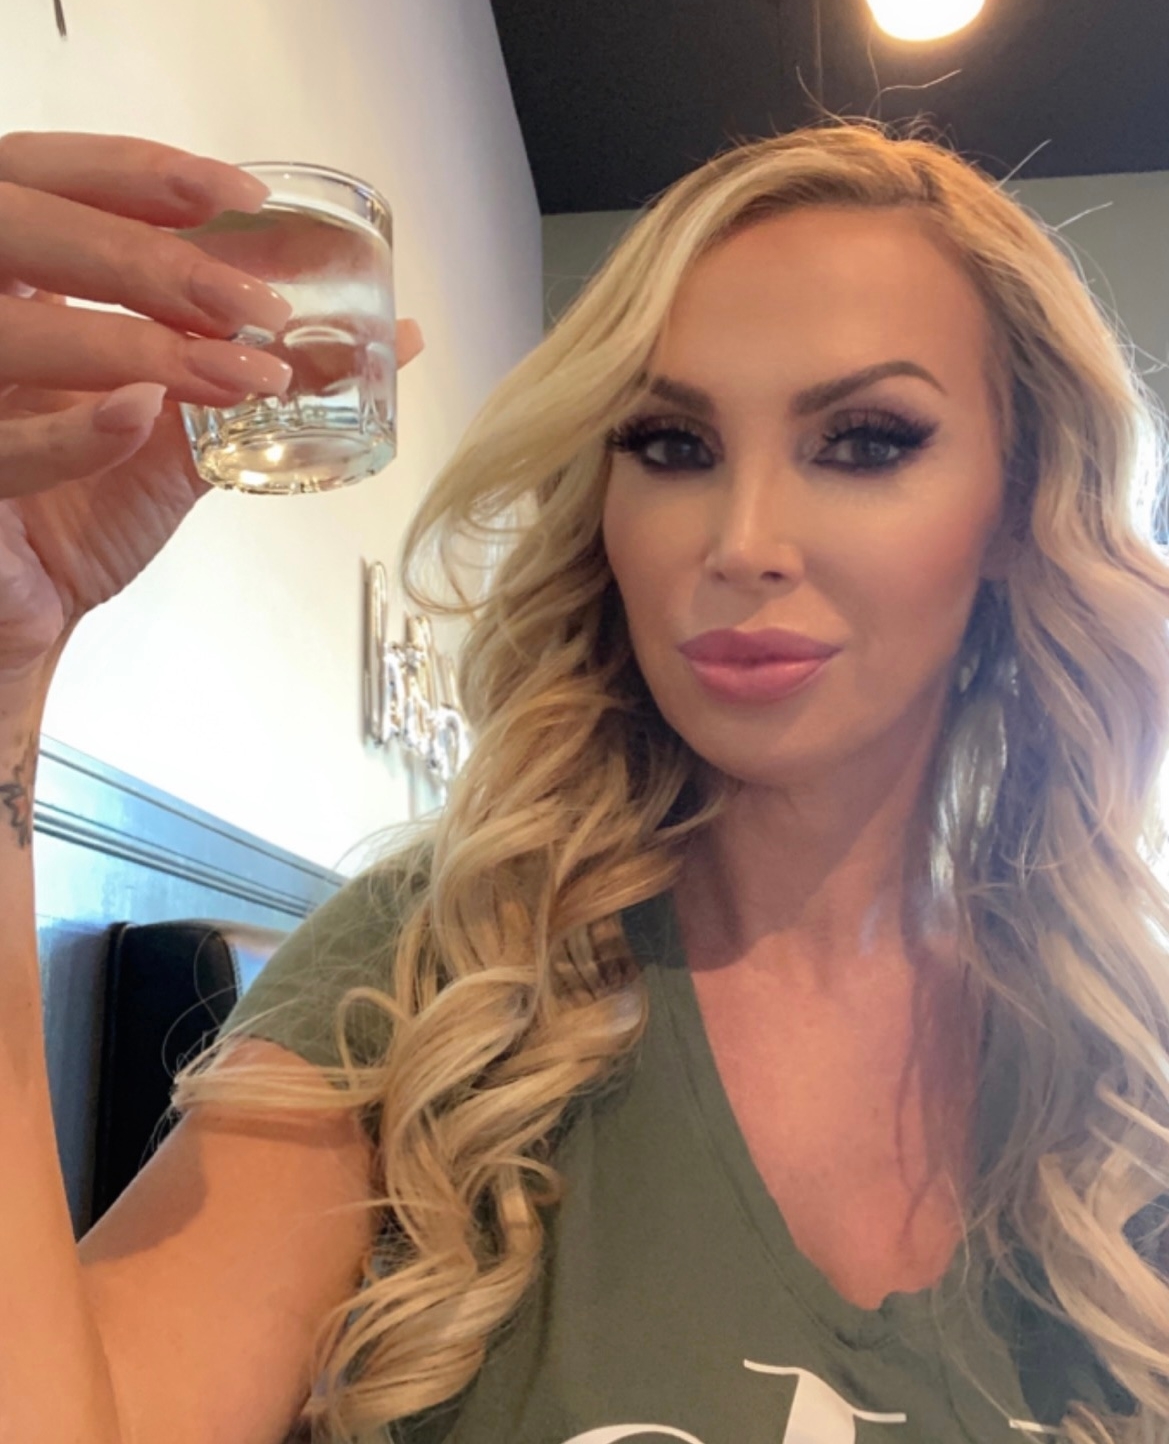 NIKKI BENZ on X: May this selfie bless your start to the week 😁 #Monday  t.colrSa3UoptO  X